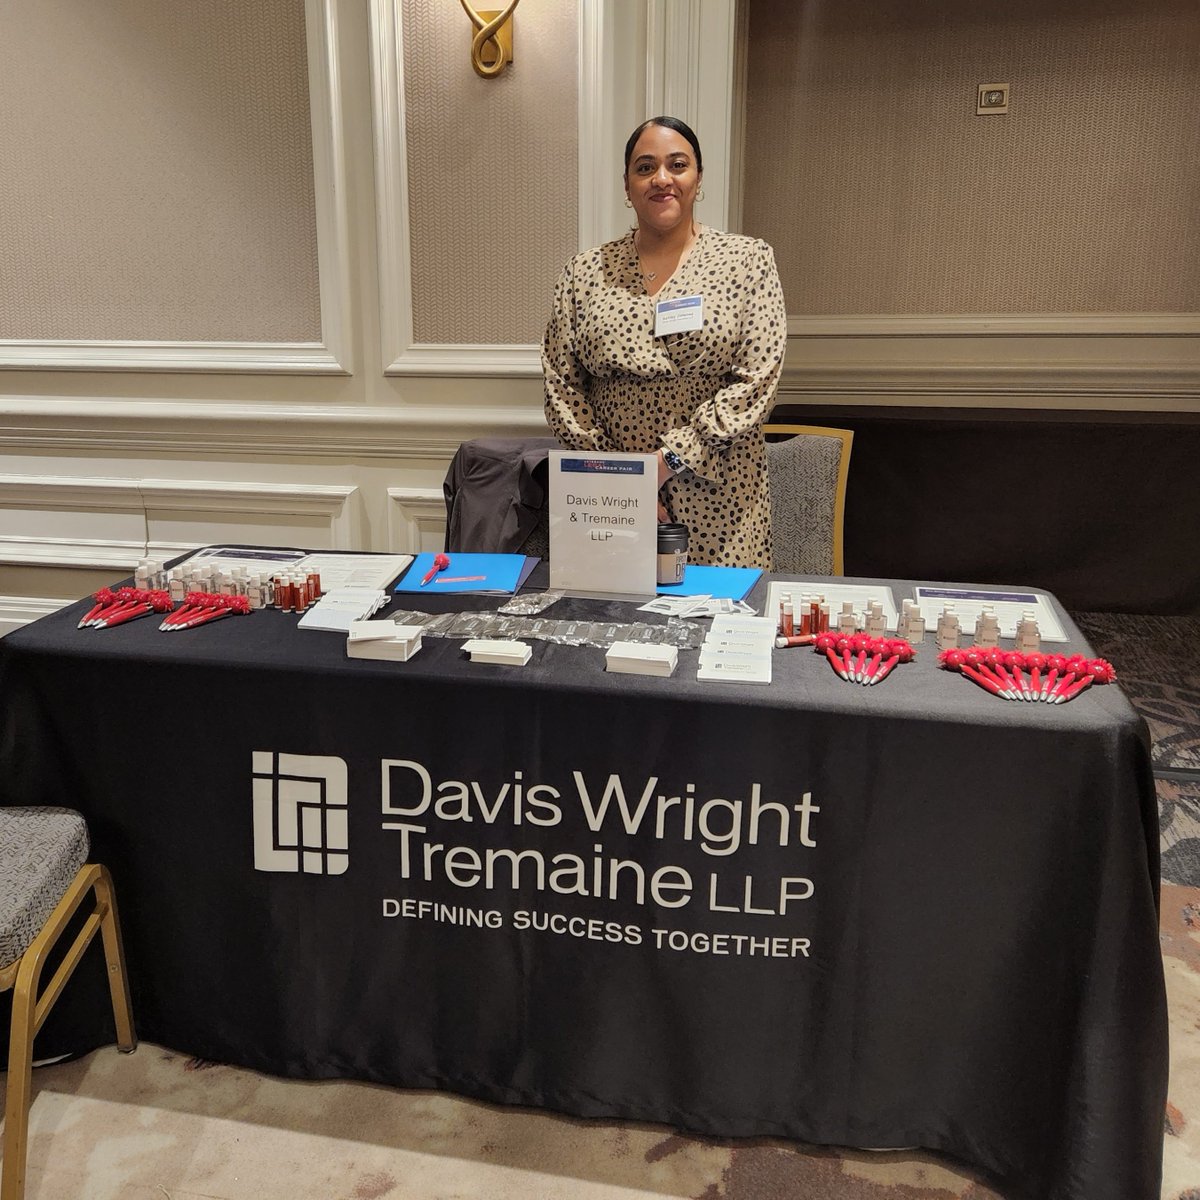 test Twitter Media - Our open career fair is winding down - stop by and meet with representatives from @DWTLaw, @BoardVetAppeals, @lathamwatkins, and @SkaddenArps before interviews begin this afternoon. #VLCF22 https://t.co/XP3ohXNLgC